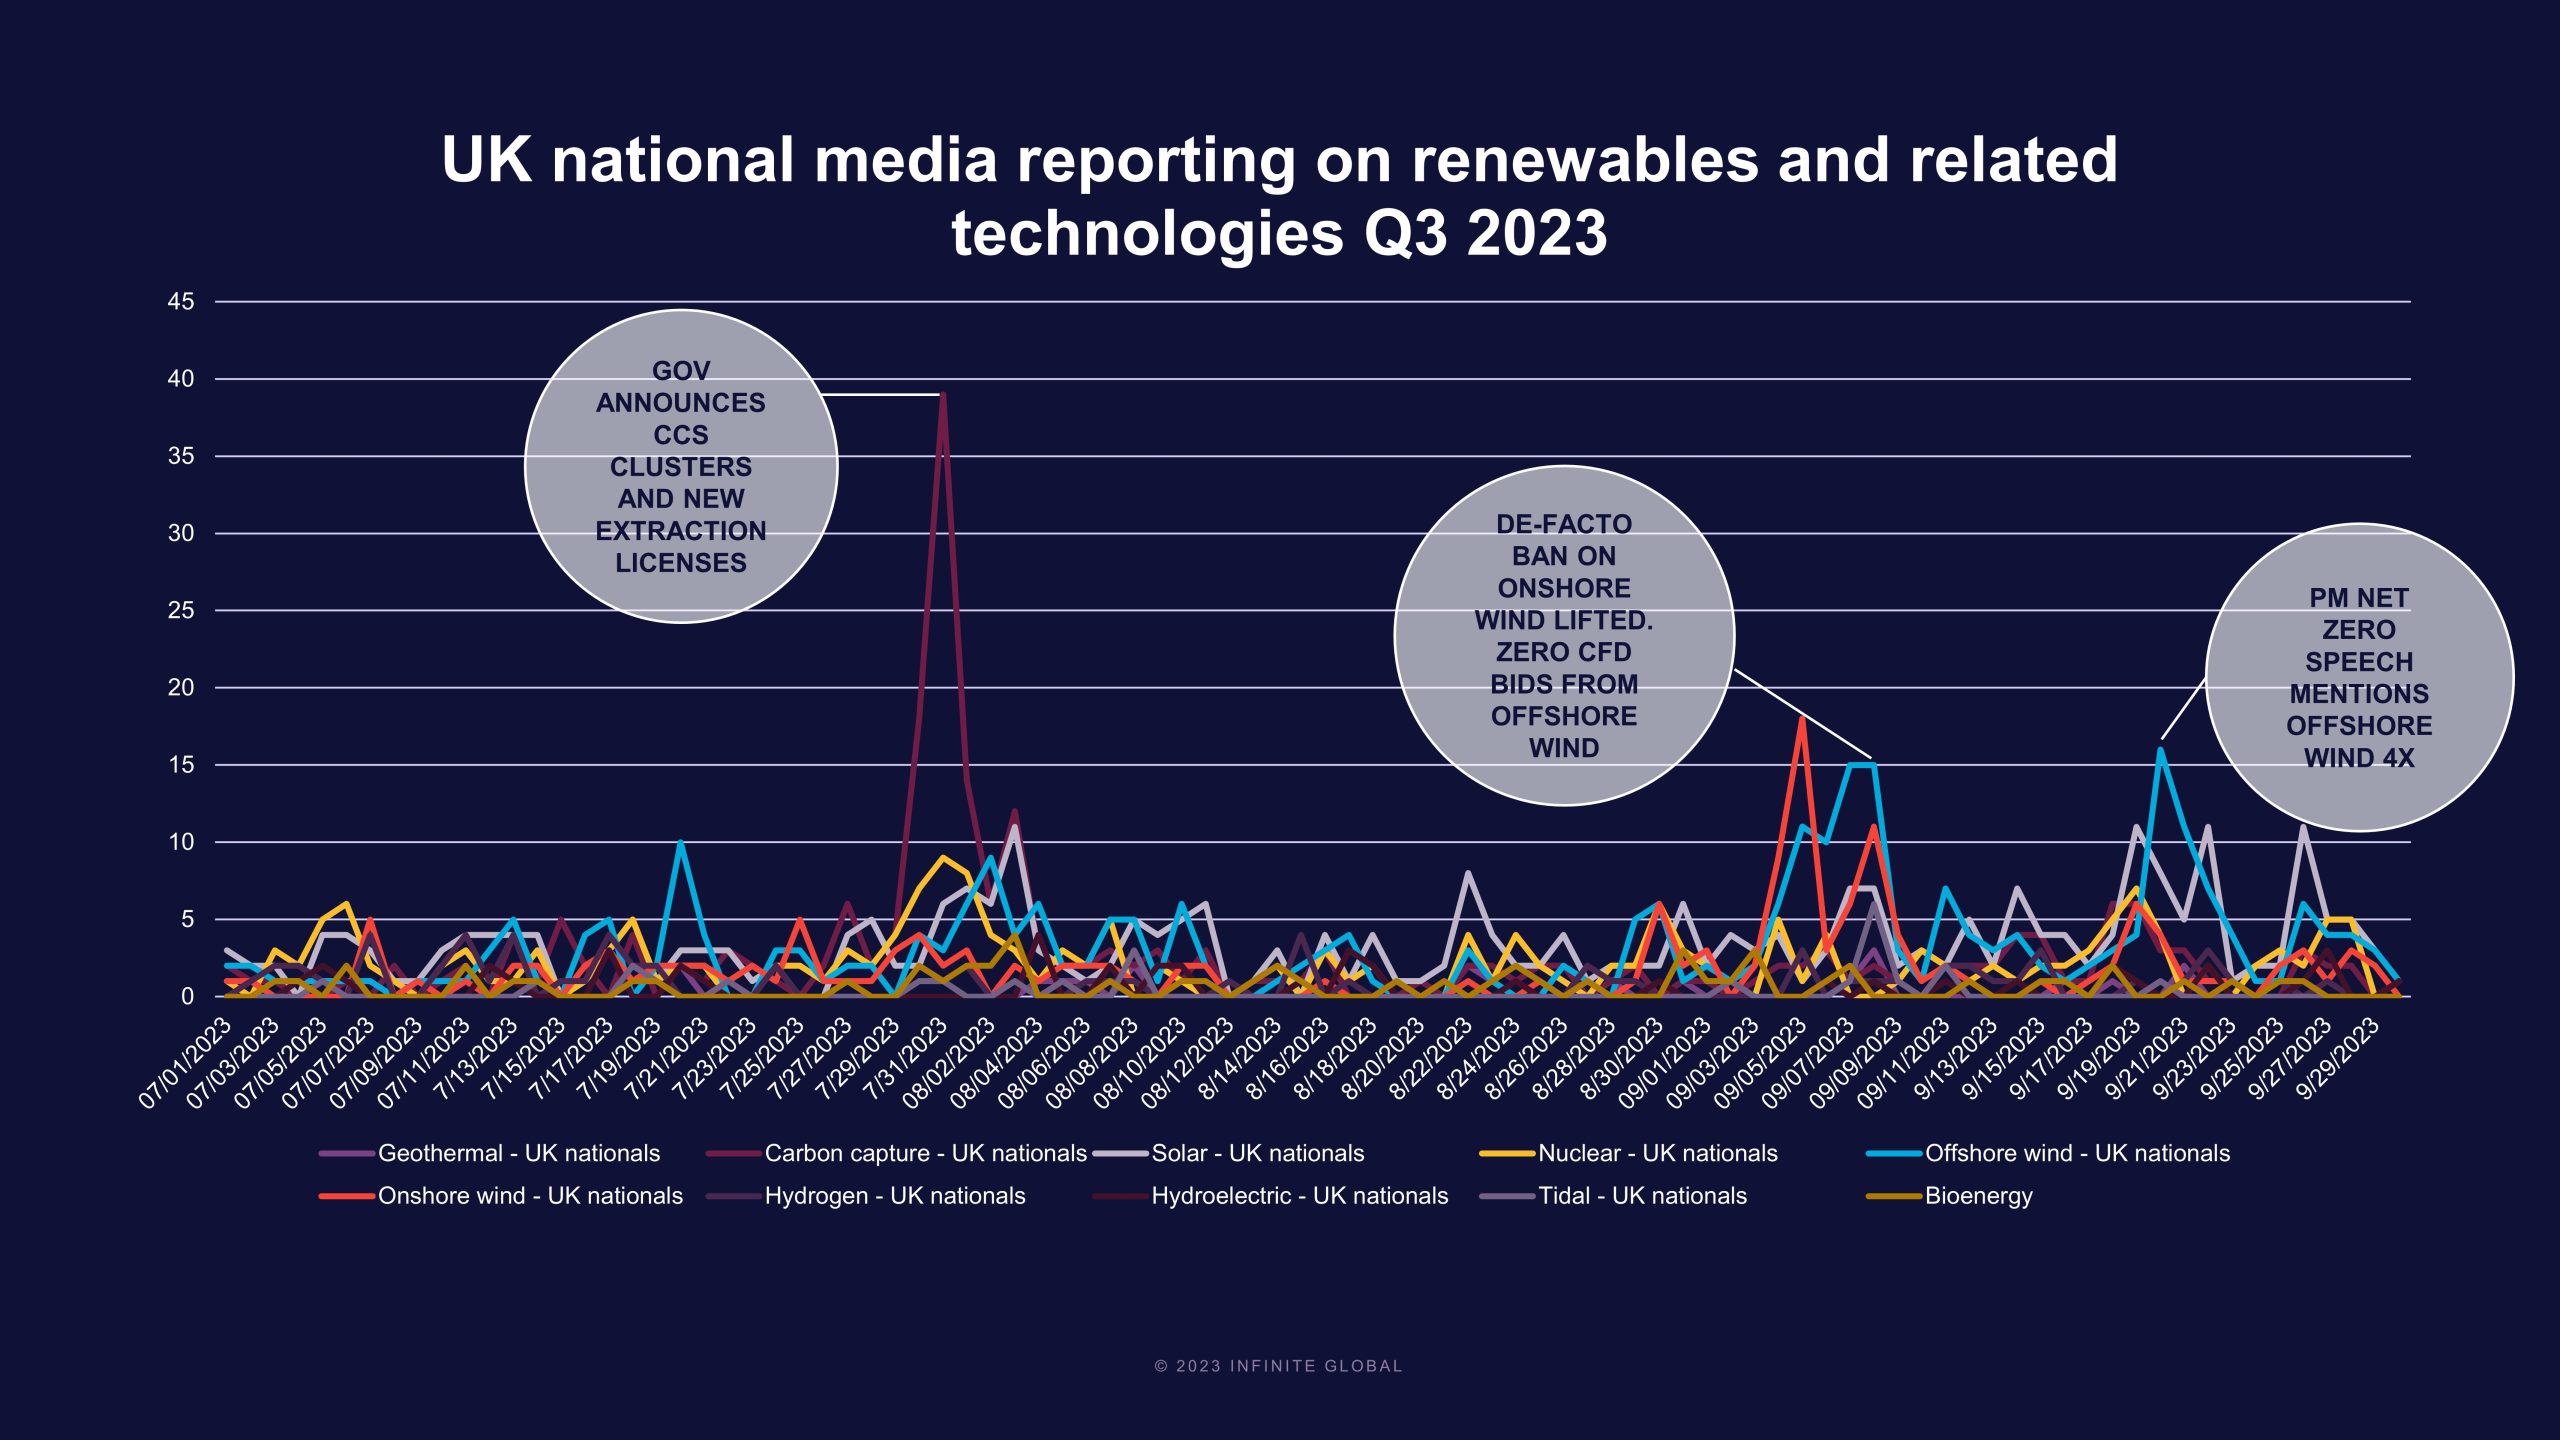 UK national media reporting on renewables and related technologies Q3 2023